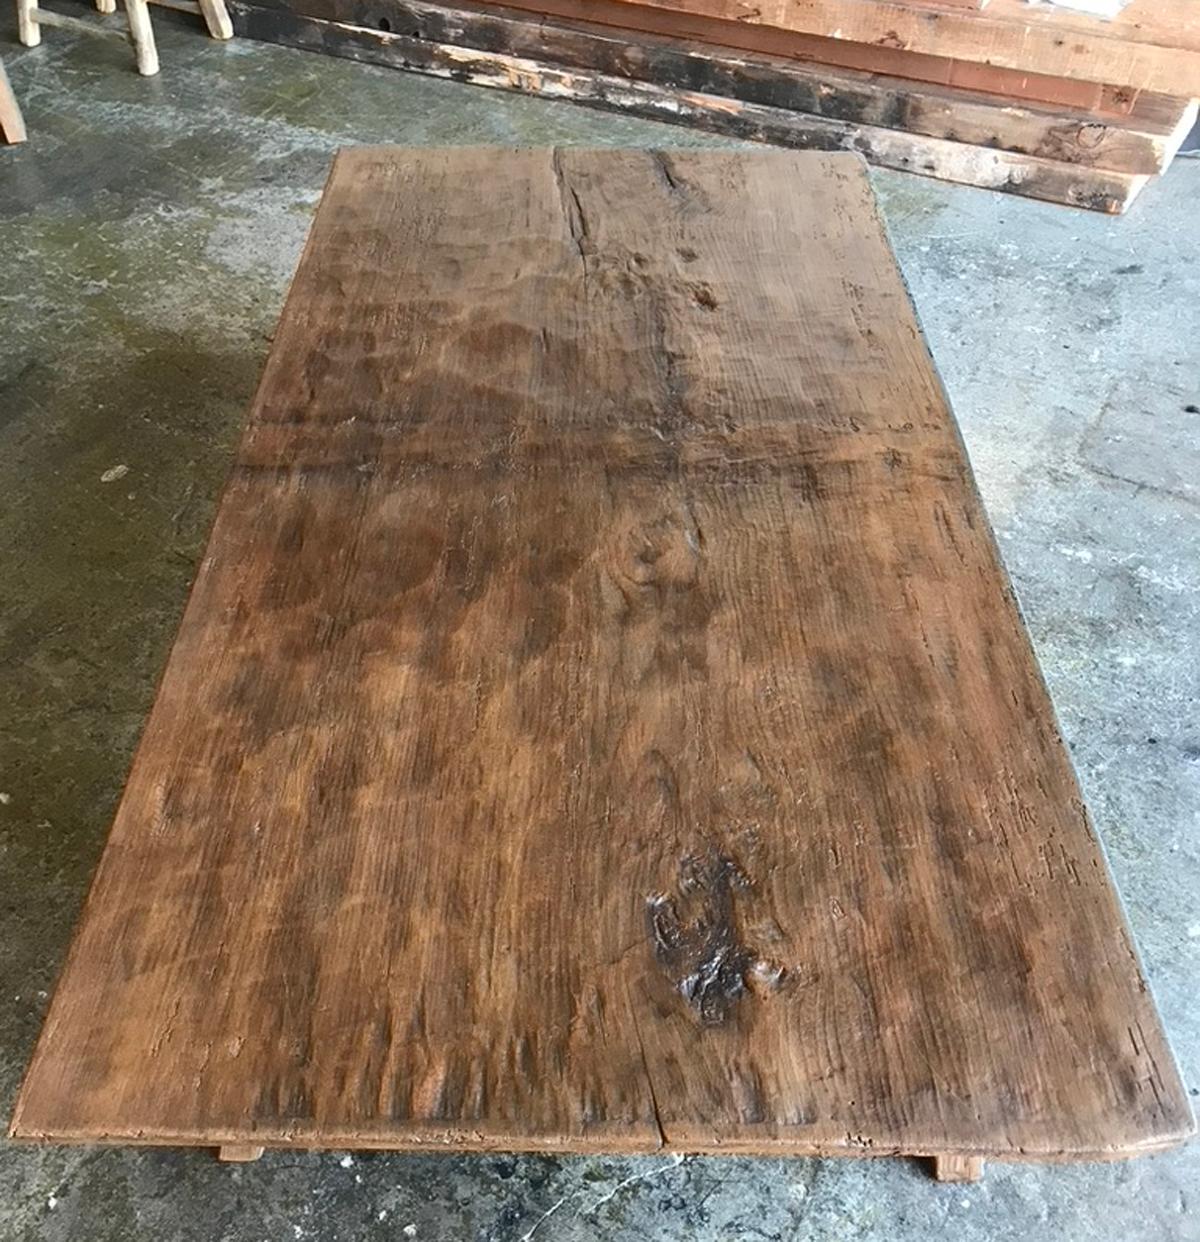 Wood One Wide Board Hand Hewn Coffee Table For Sale